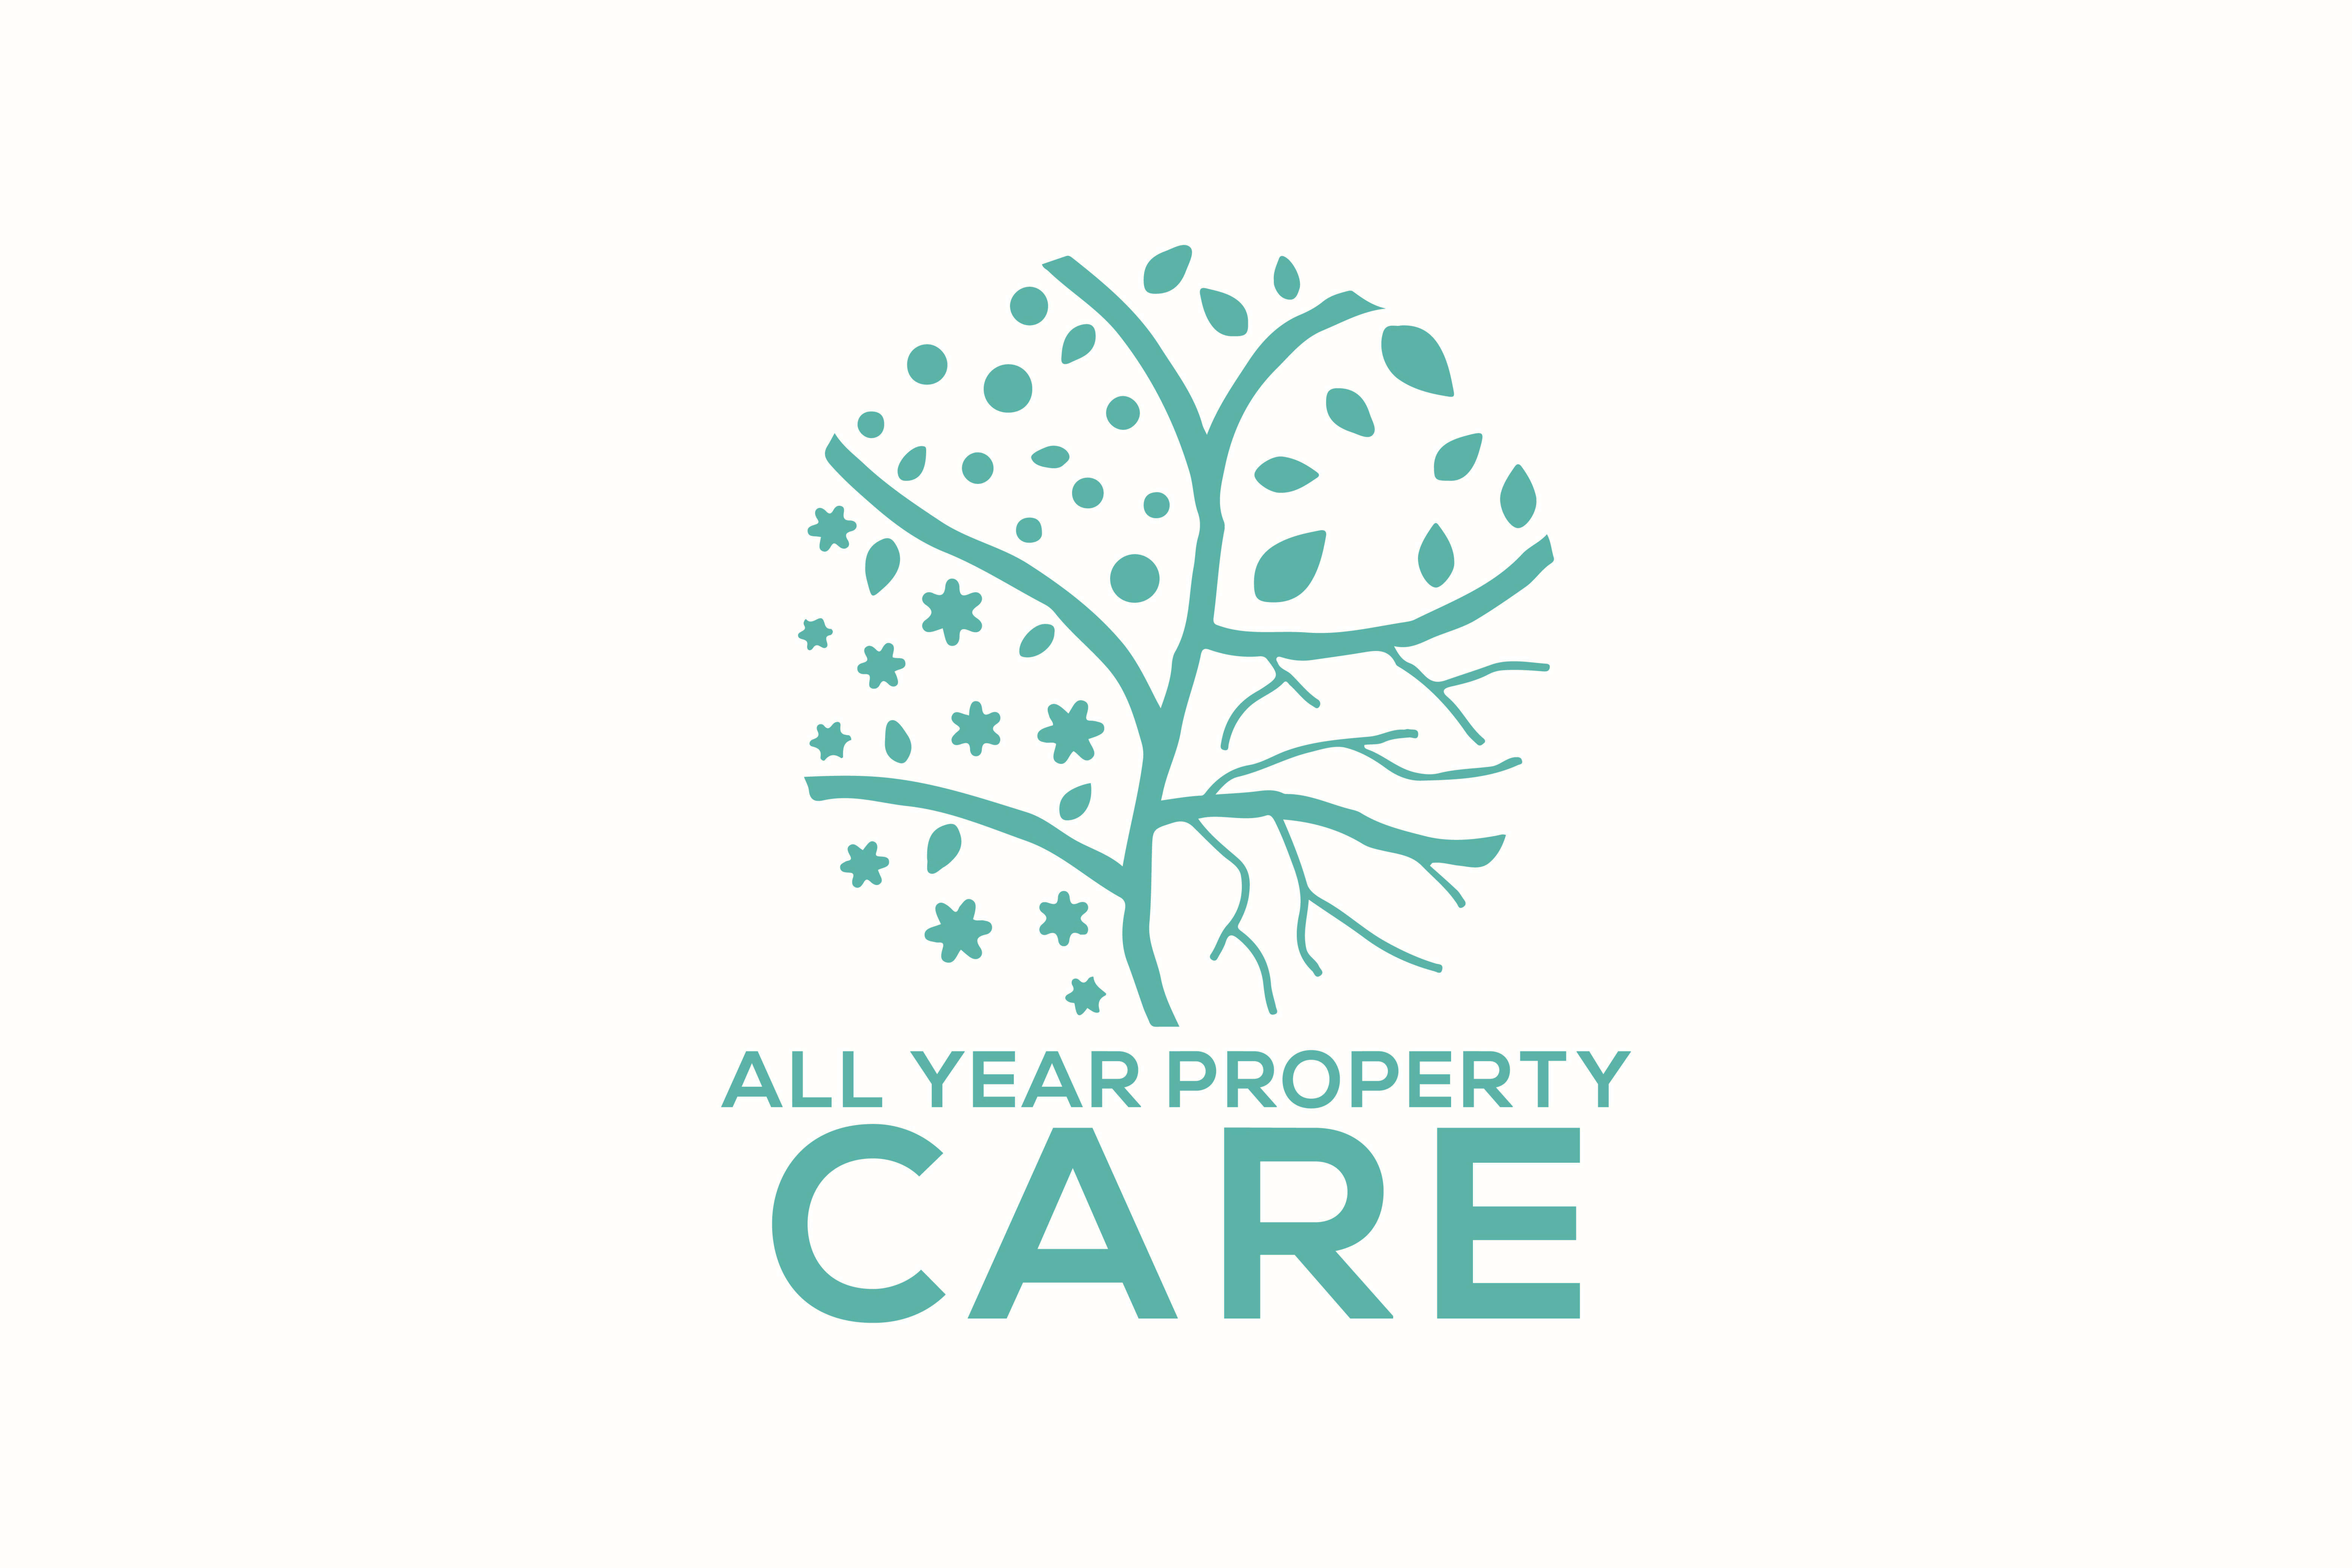 All Year Property Care